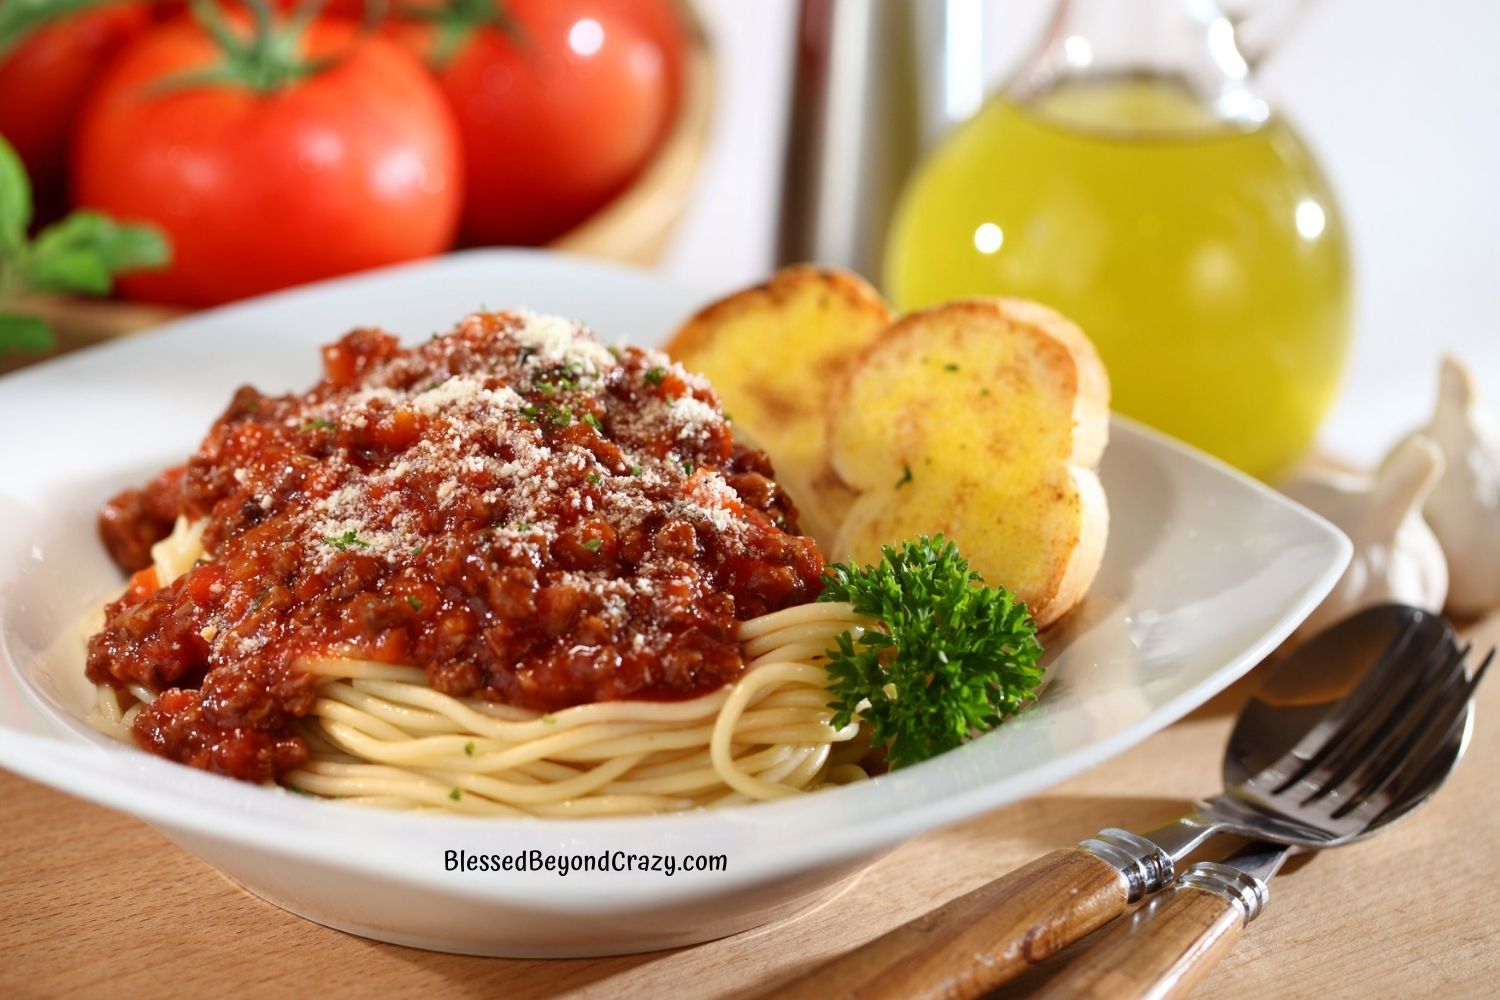 Bowl of spaghetti with pasta sauce